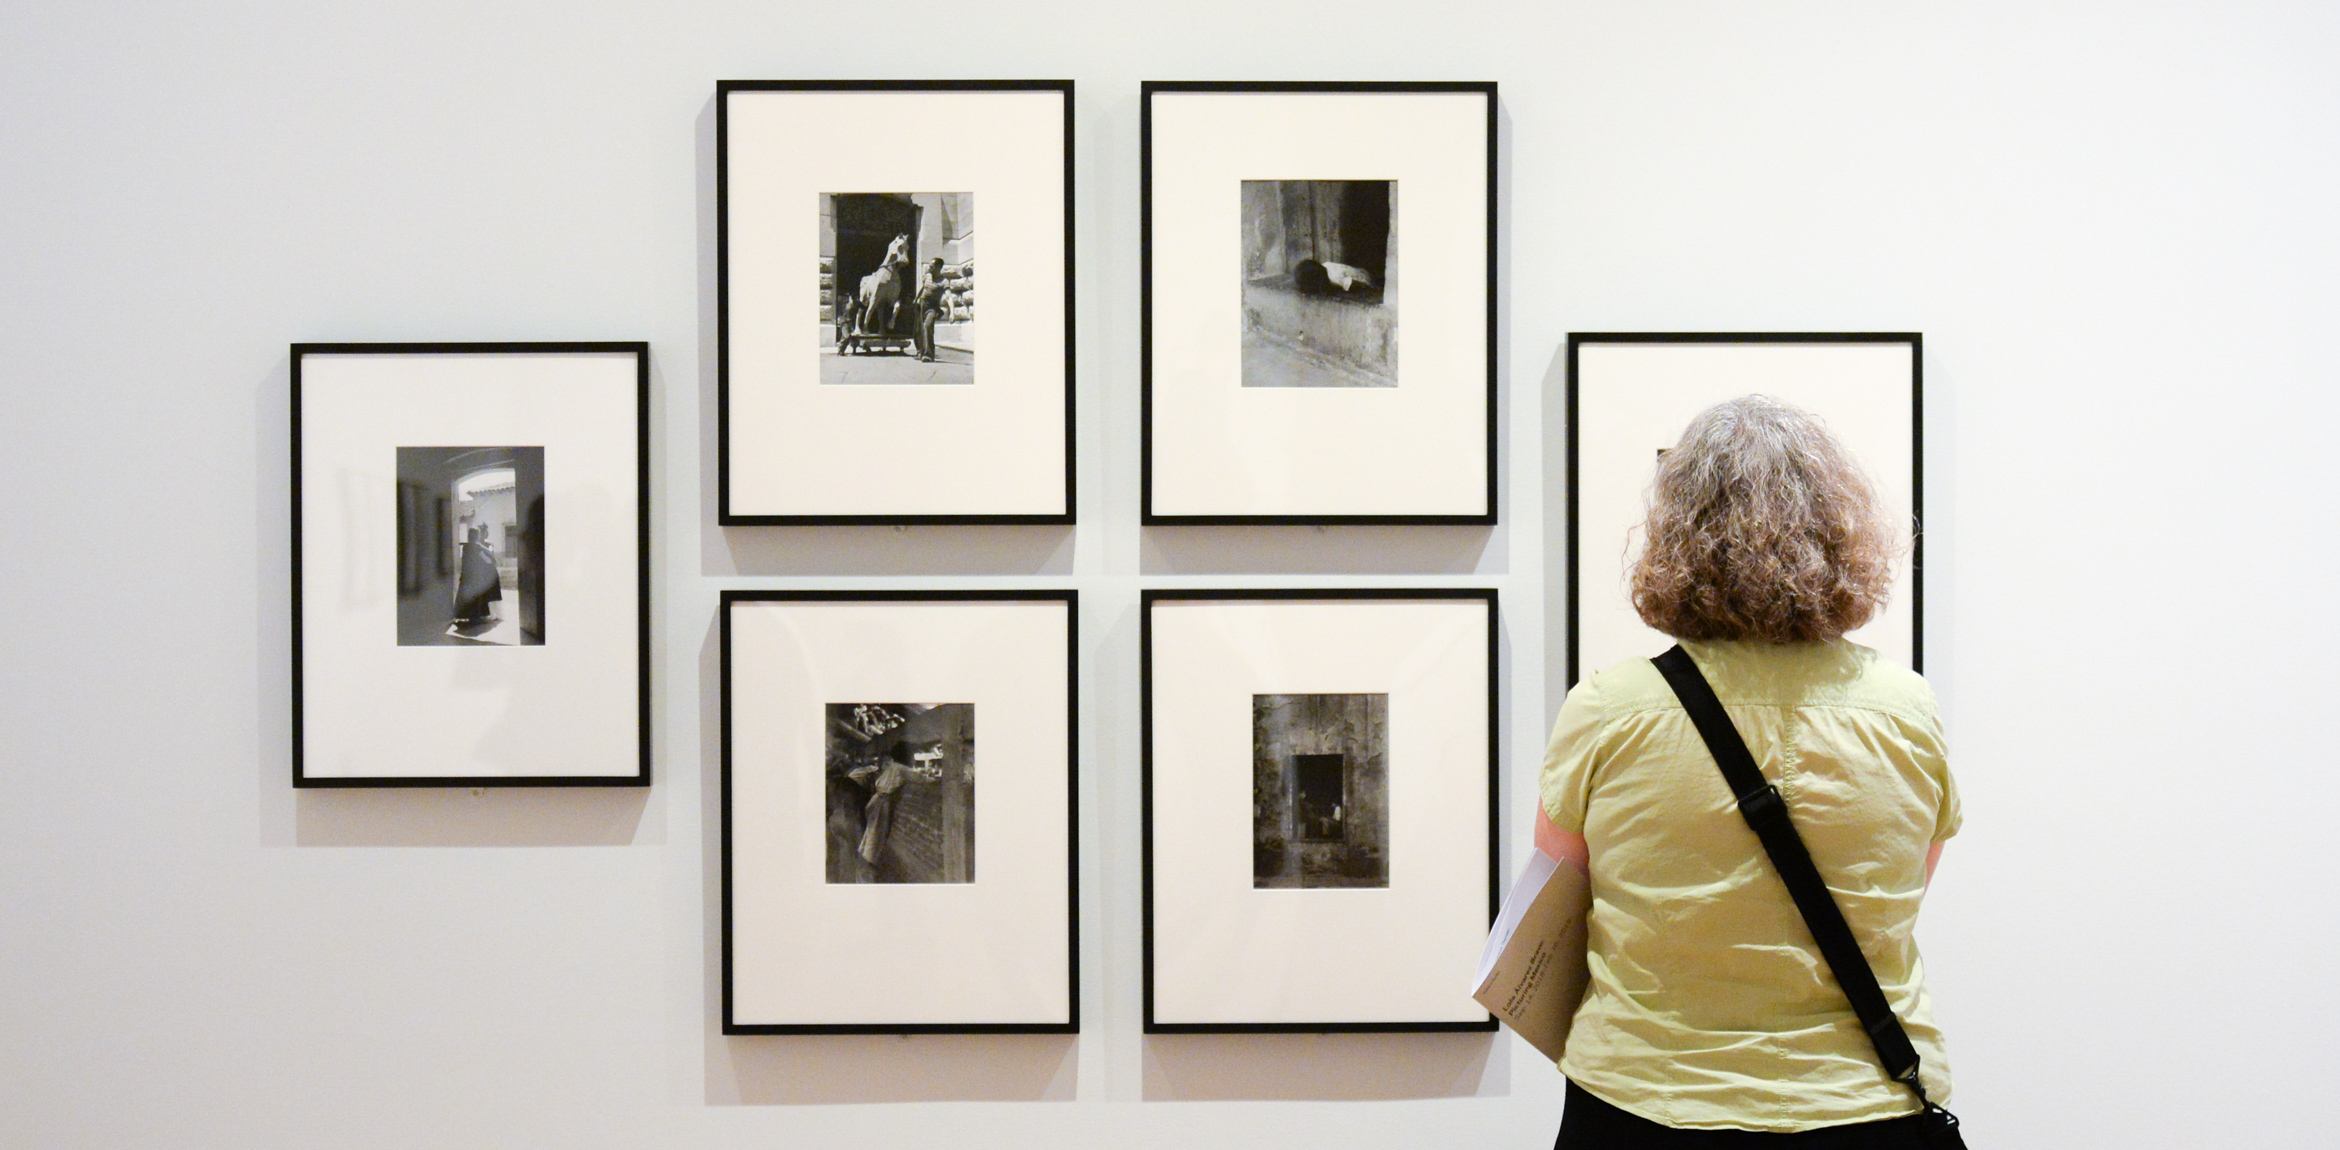 A visitor stands before a wall of Lola Álvarez Bravo's framed photographs.